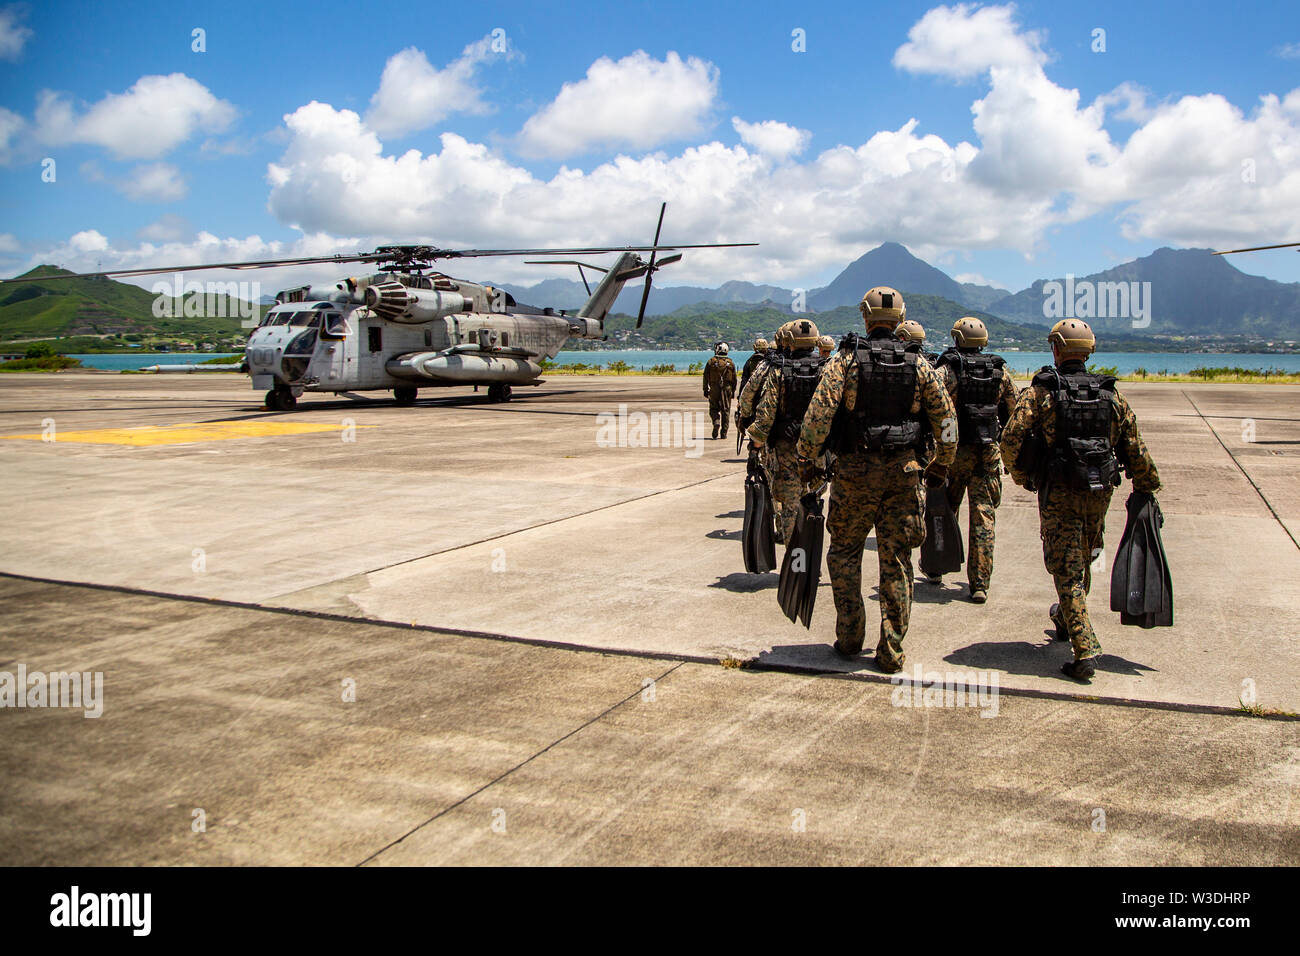 U.S. Marines with 2nd Reconnaissance Battalion make their way to the CH-53E Super Stallion Helicopter with Marine Heavy Helicopter Squadron 463 (HMH-463) for helocast training on Marine Corps Air Station, Kaneohe Bay, July 11, 2019. 2nd Reconnaissance Battalion conducted the training in preparation for their deployment with the 22nd Marine Expeditionary Unit. (U.S. Marine Corps photo by Cpl. Eric Tso) Stock Photo